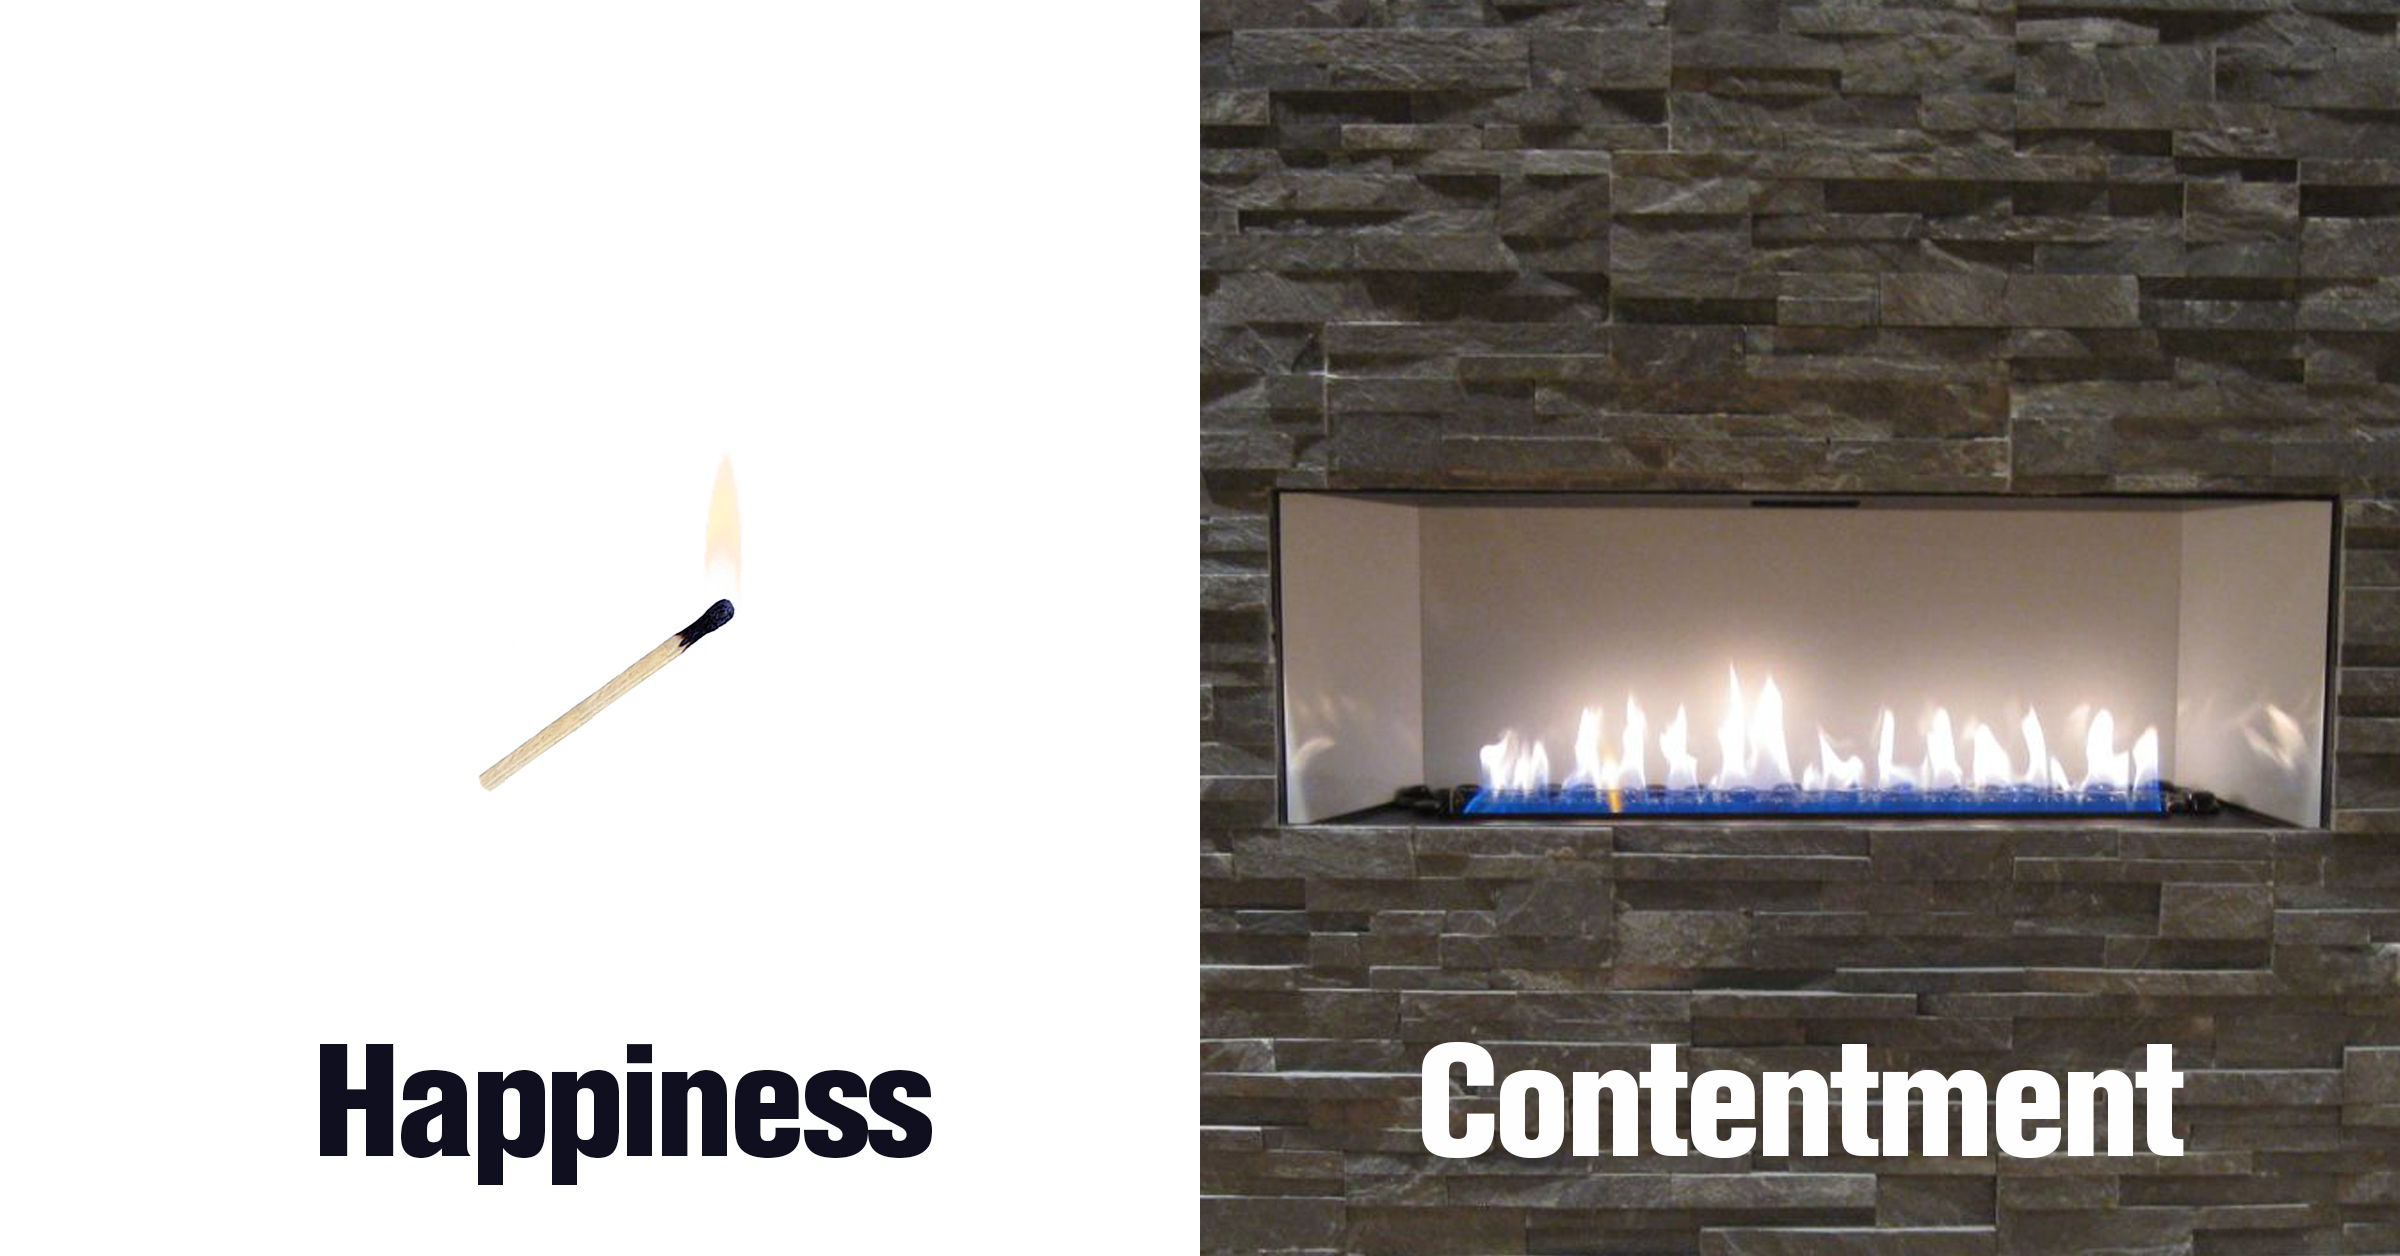 happiness-vs-contentment-one-lasts-the-other-doesn't-blog-header-from-Cereal-a-creative-marketing-agency-fort-collins-colorado